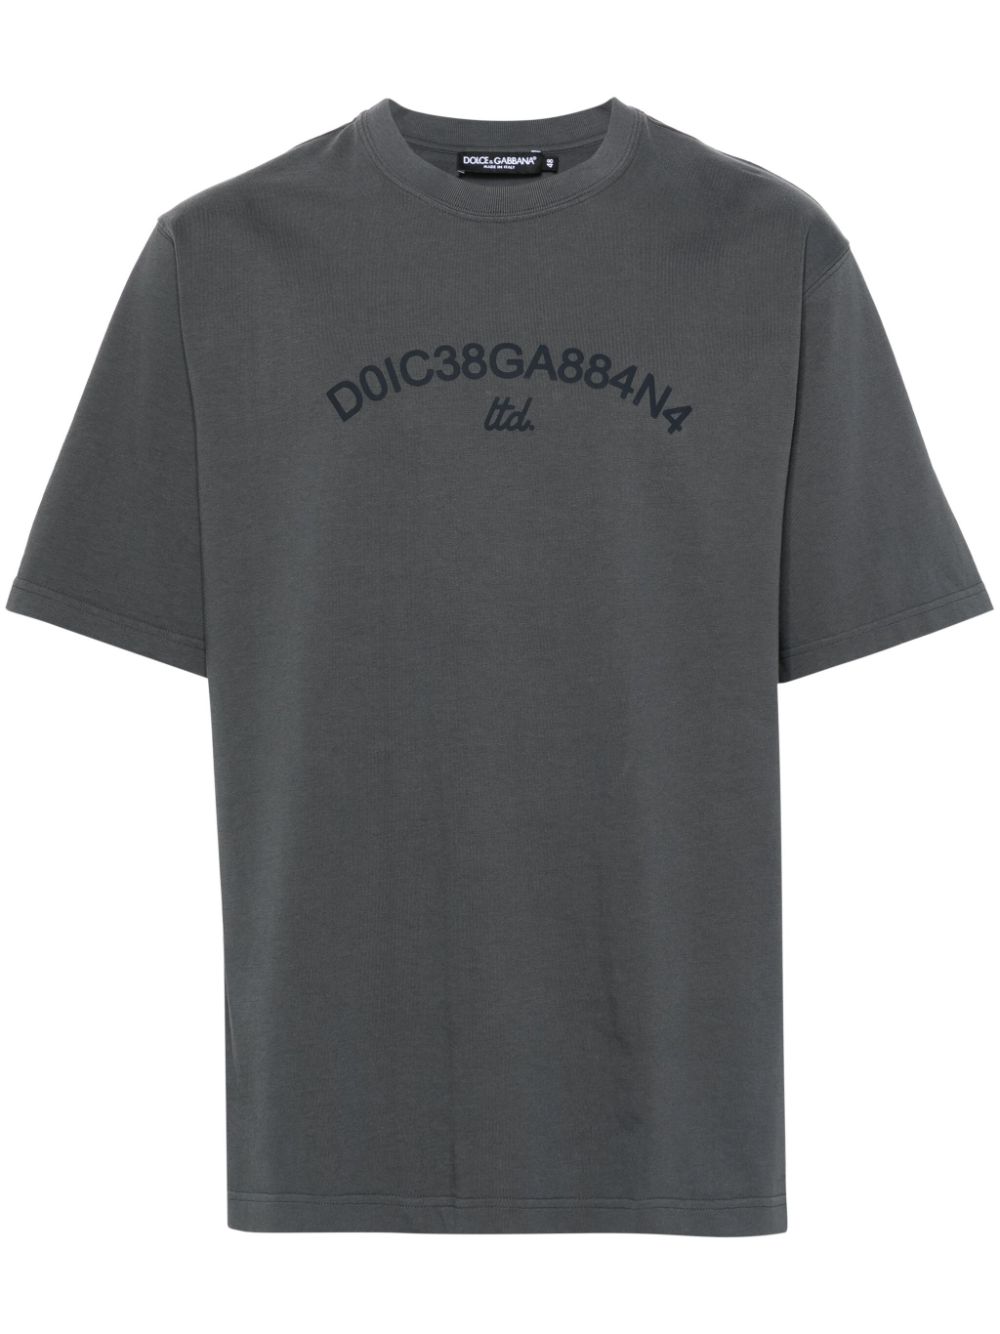 Short-sleeved t-shirt with logo print